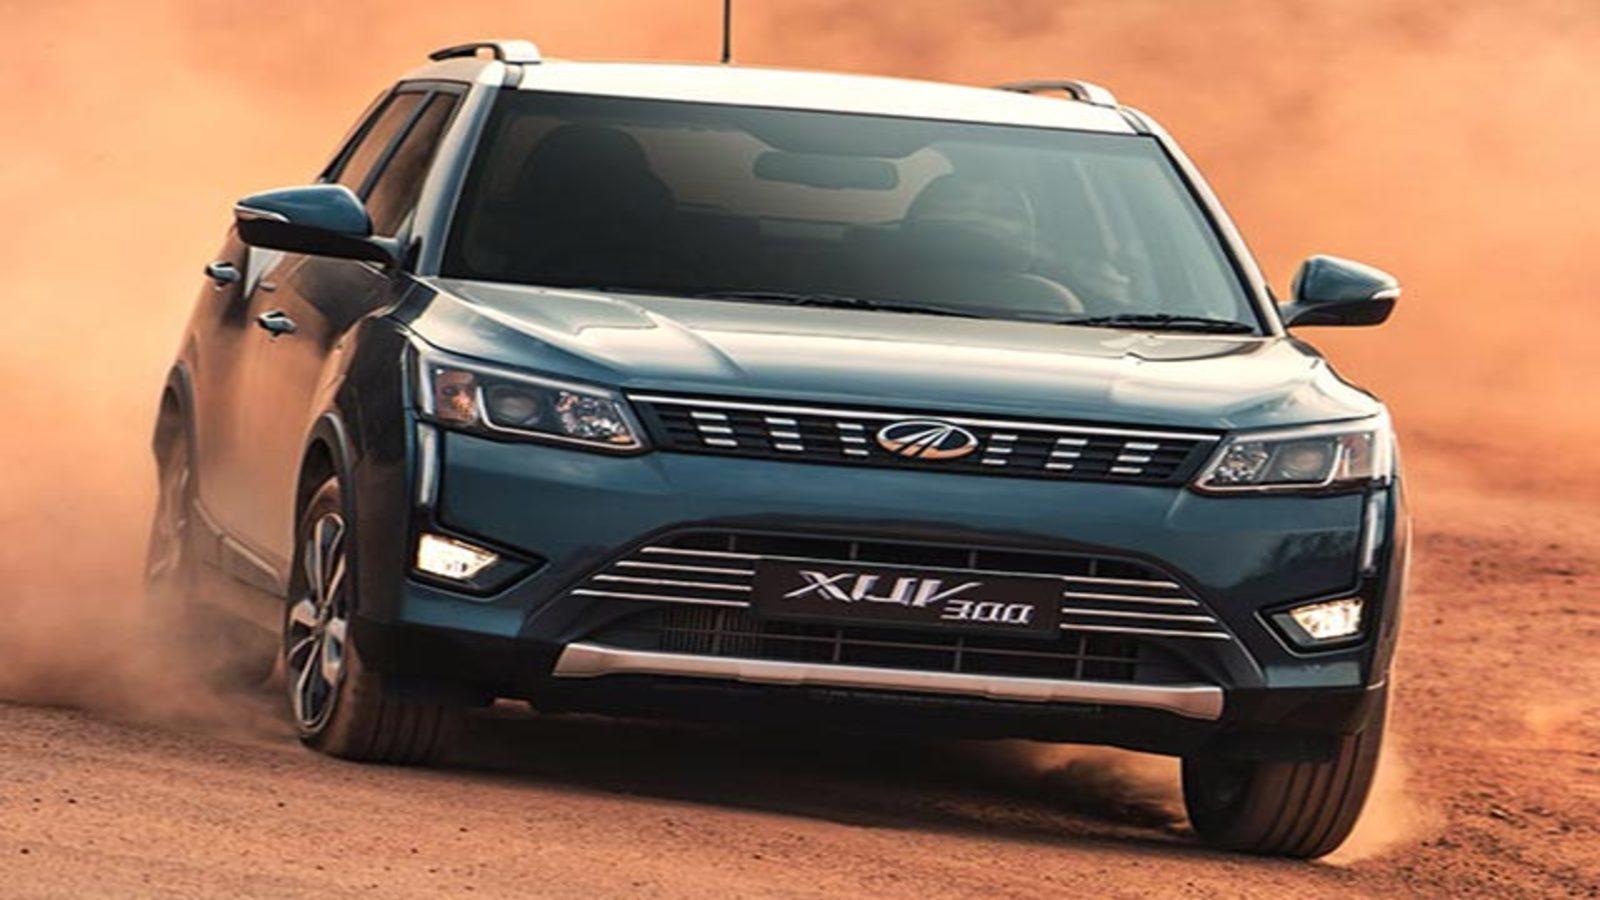 Maruti Suzuki Brezza vs Mahindra XUV300: Comparing Their Variants Under Rs 9 Lakh for Safety-conscious Car Buyers